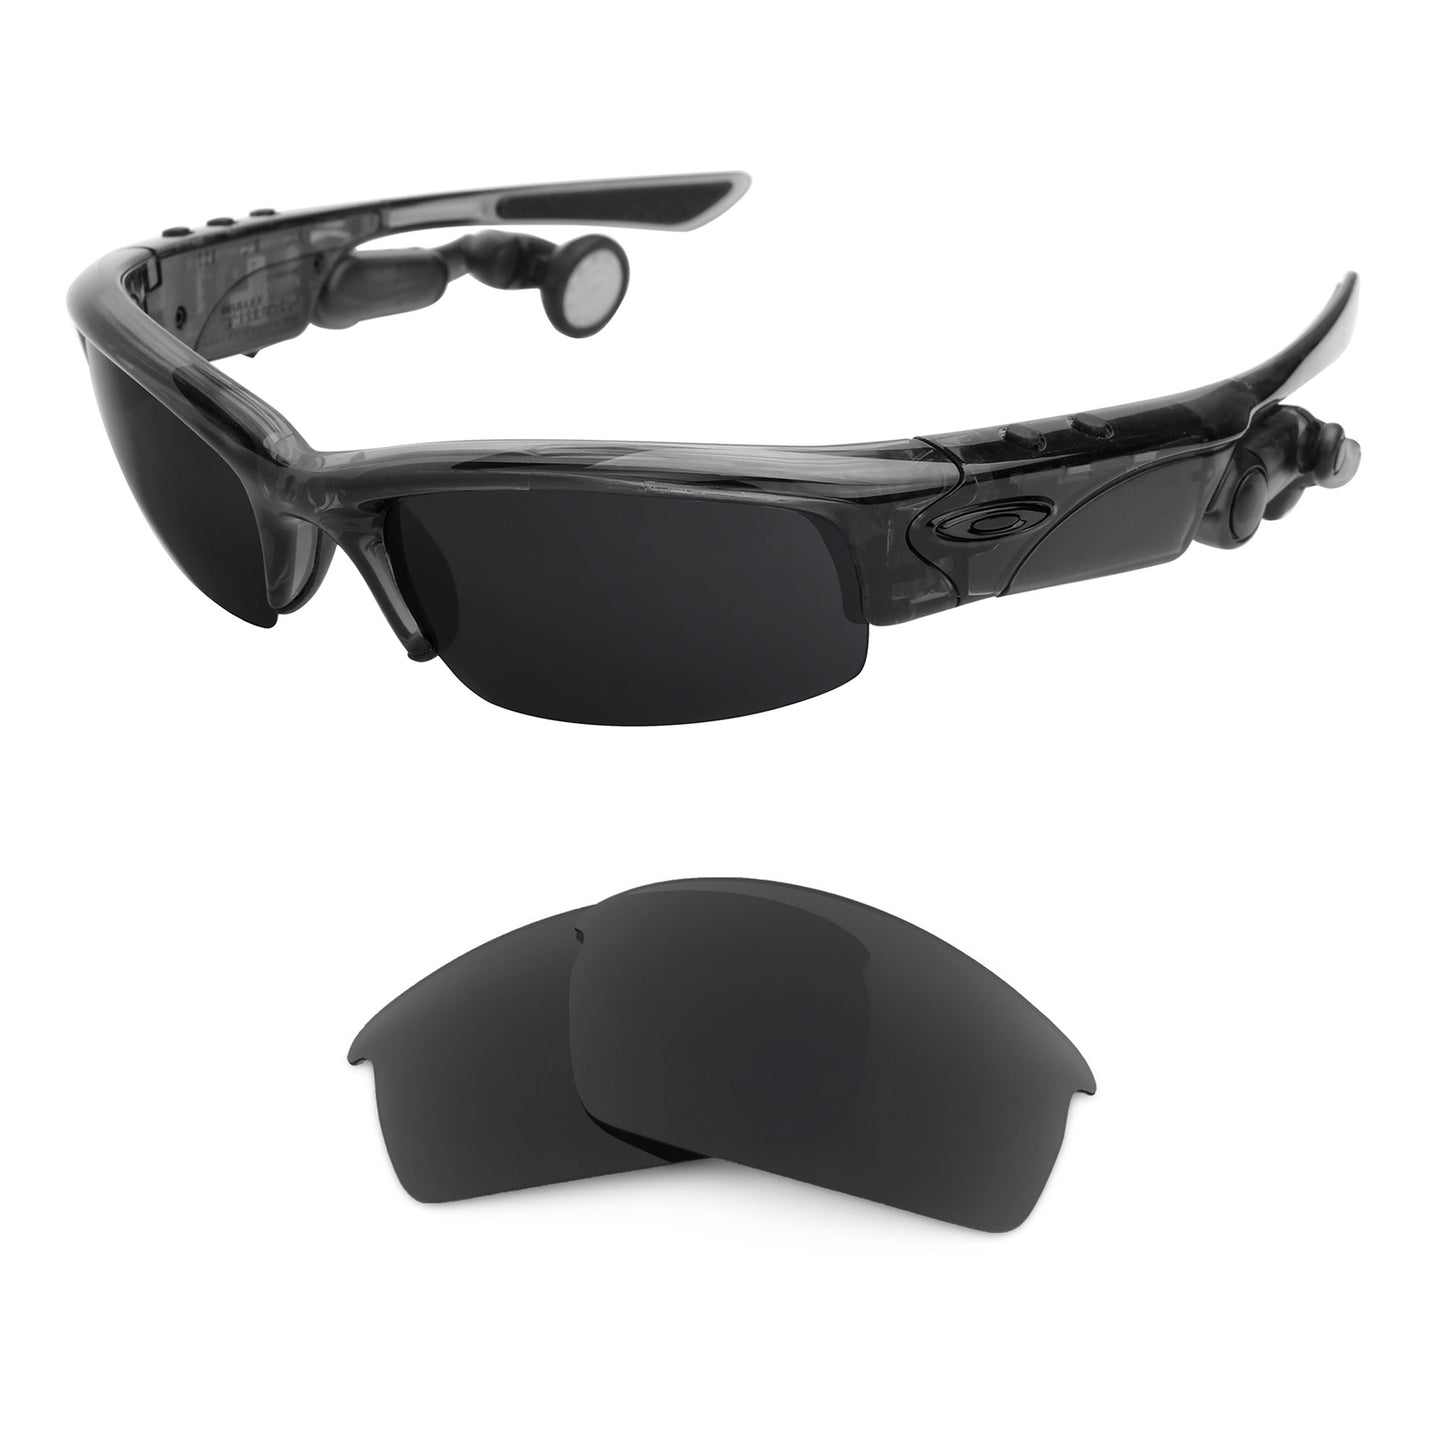 Oakley Thump Pro sunglasses with replacement lenses